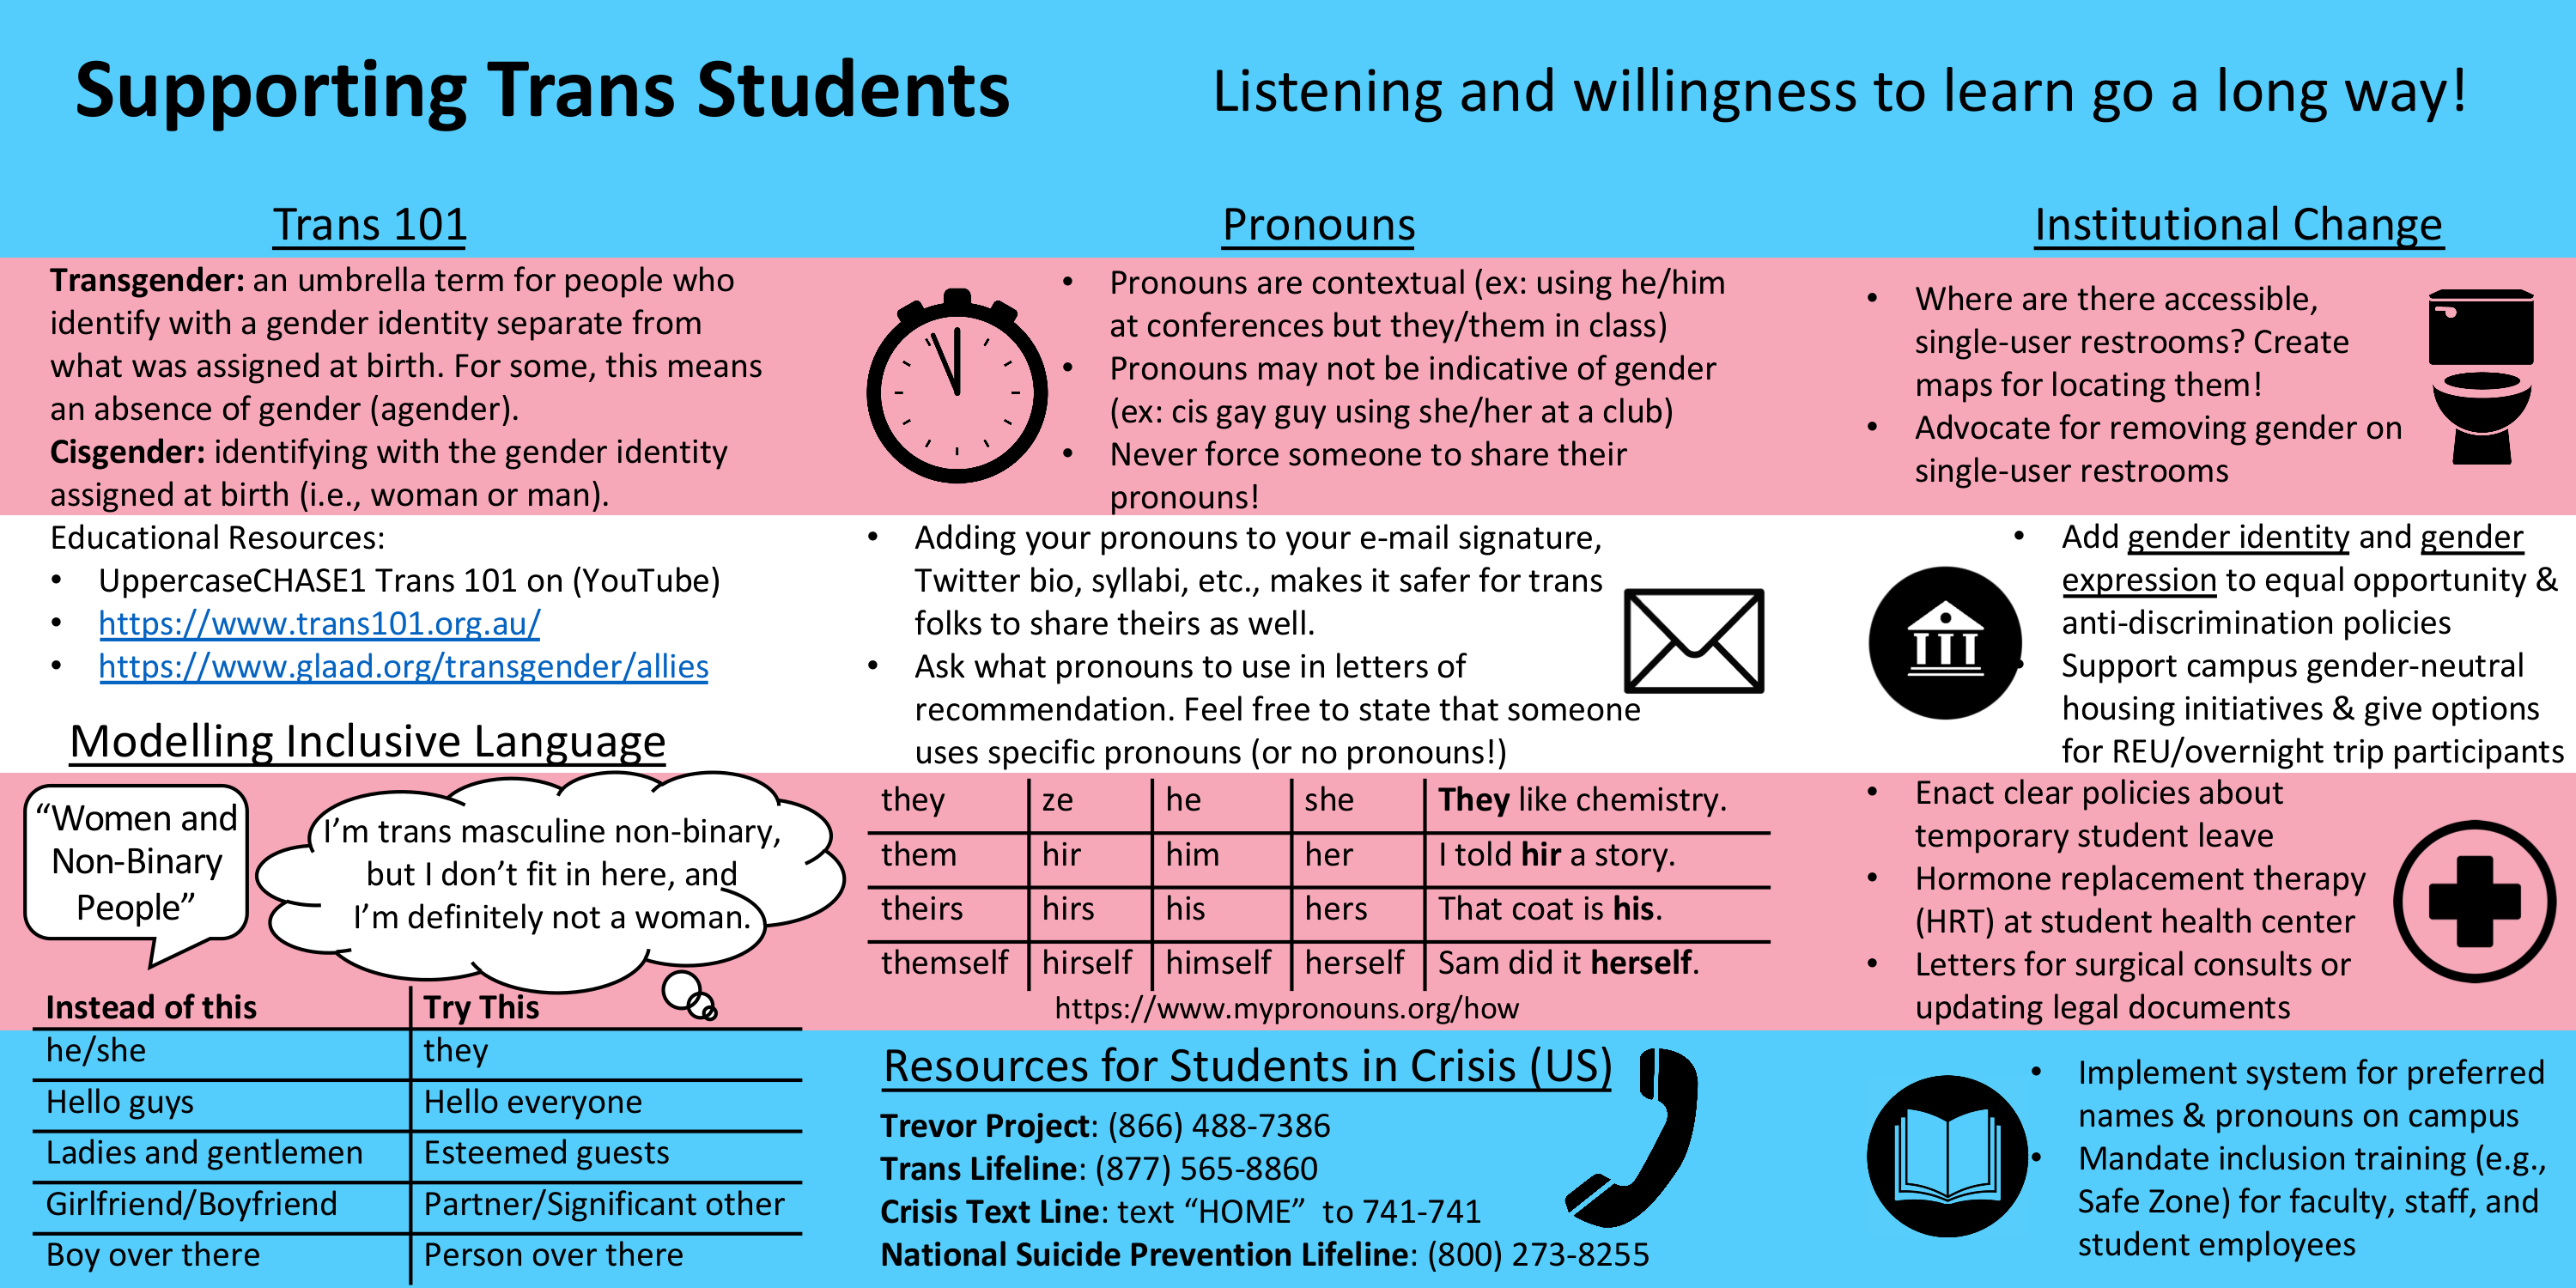 A poster about supporting trans students with the trans flag as the
background.